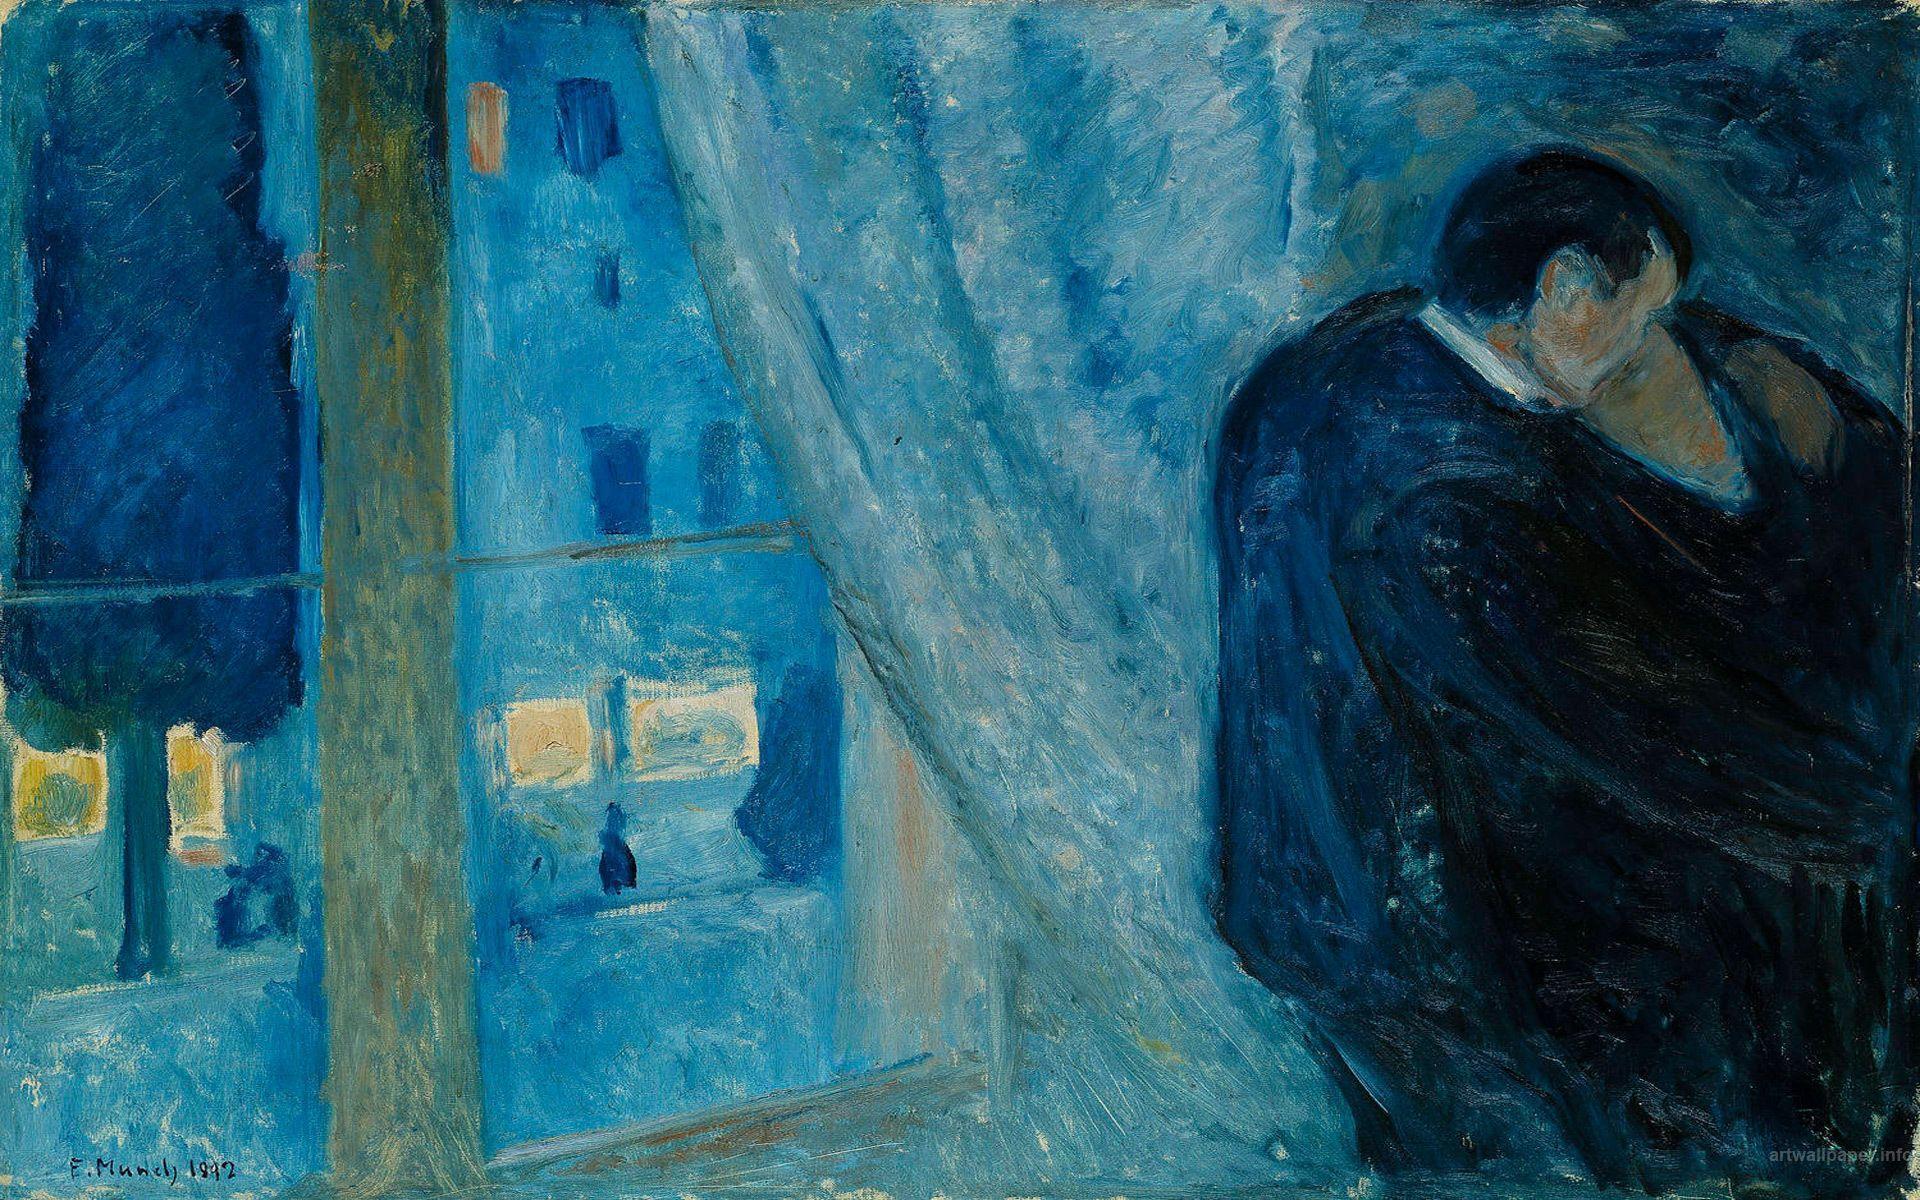 Painting Edvard Munch wallpaper and image